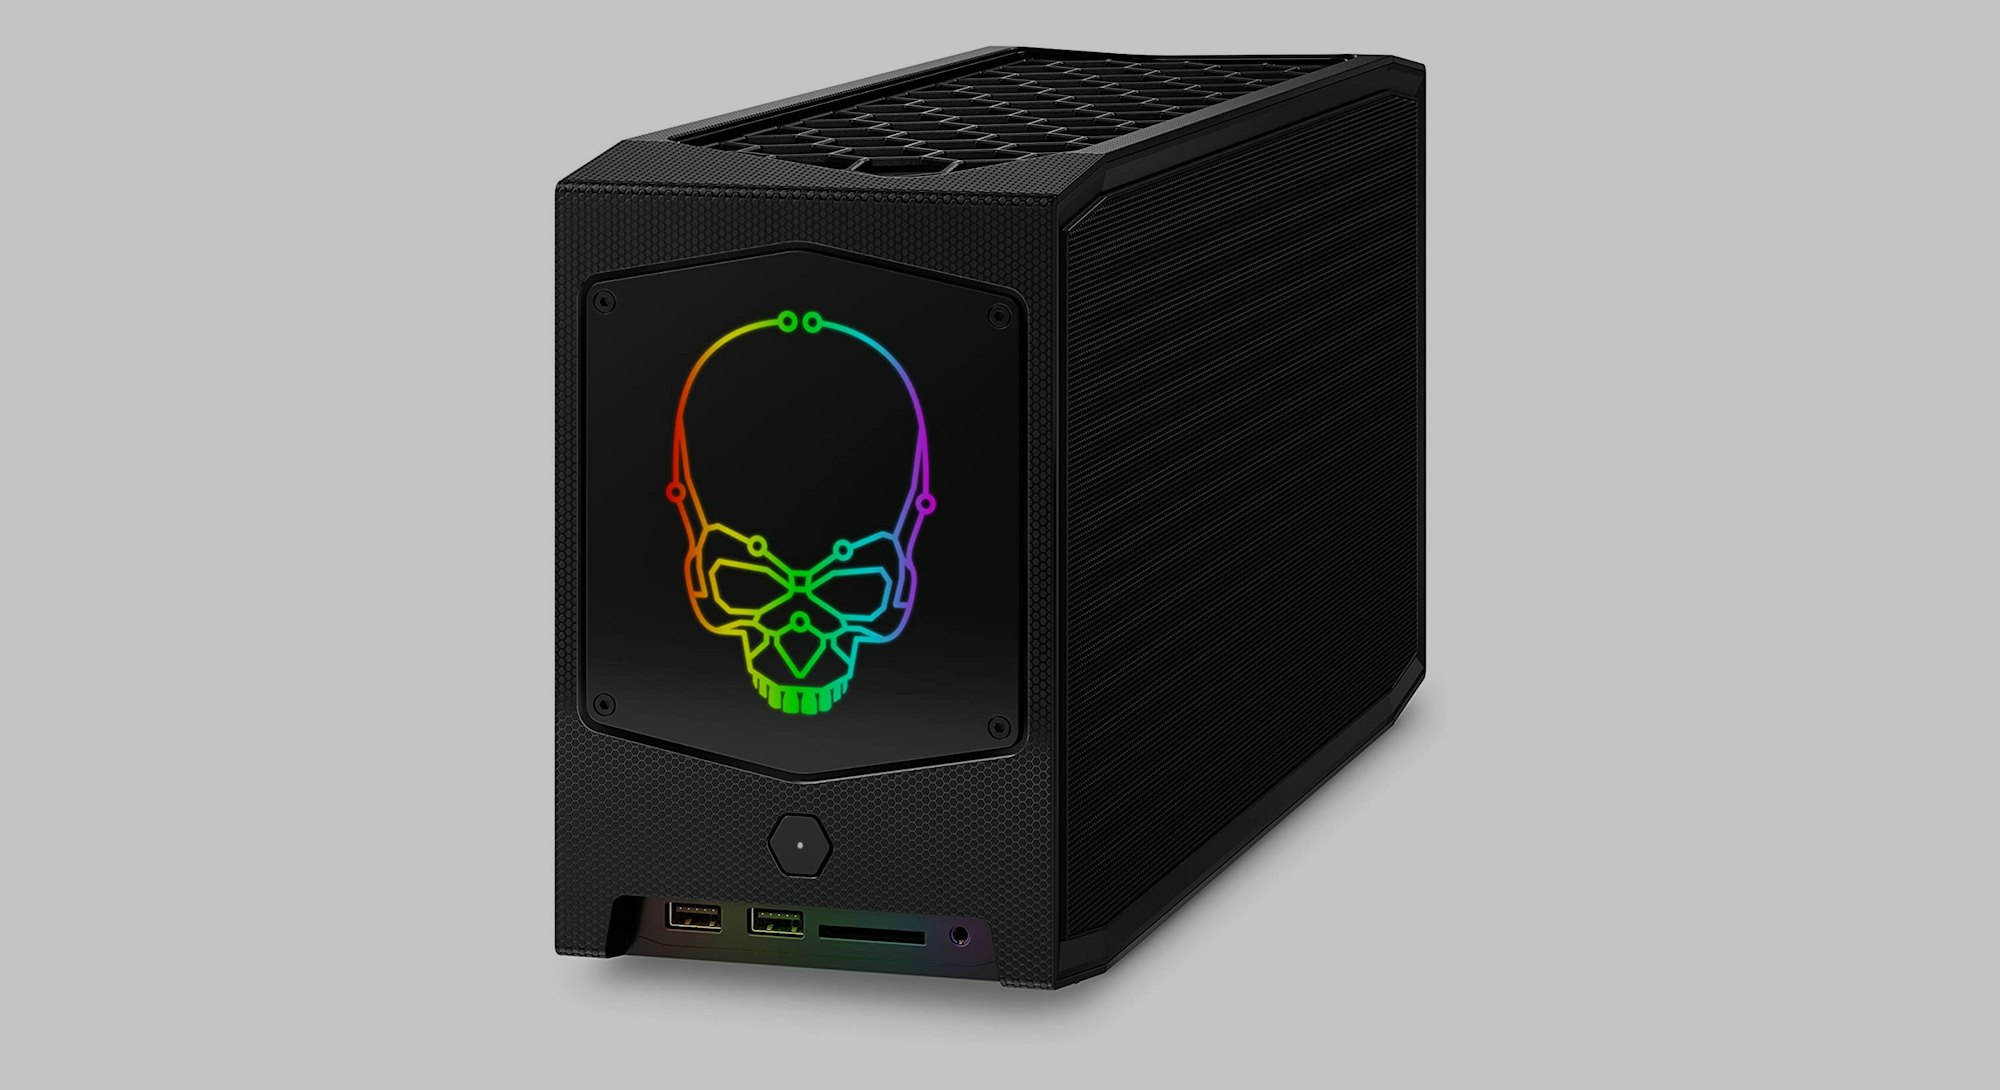 The 7 best mini gaming PCs to install SteamOS 3 on